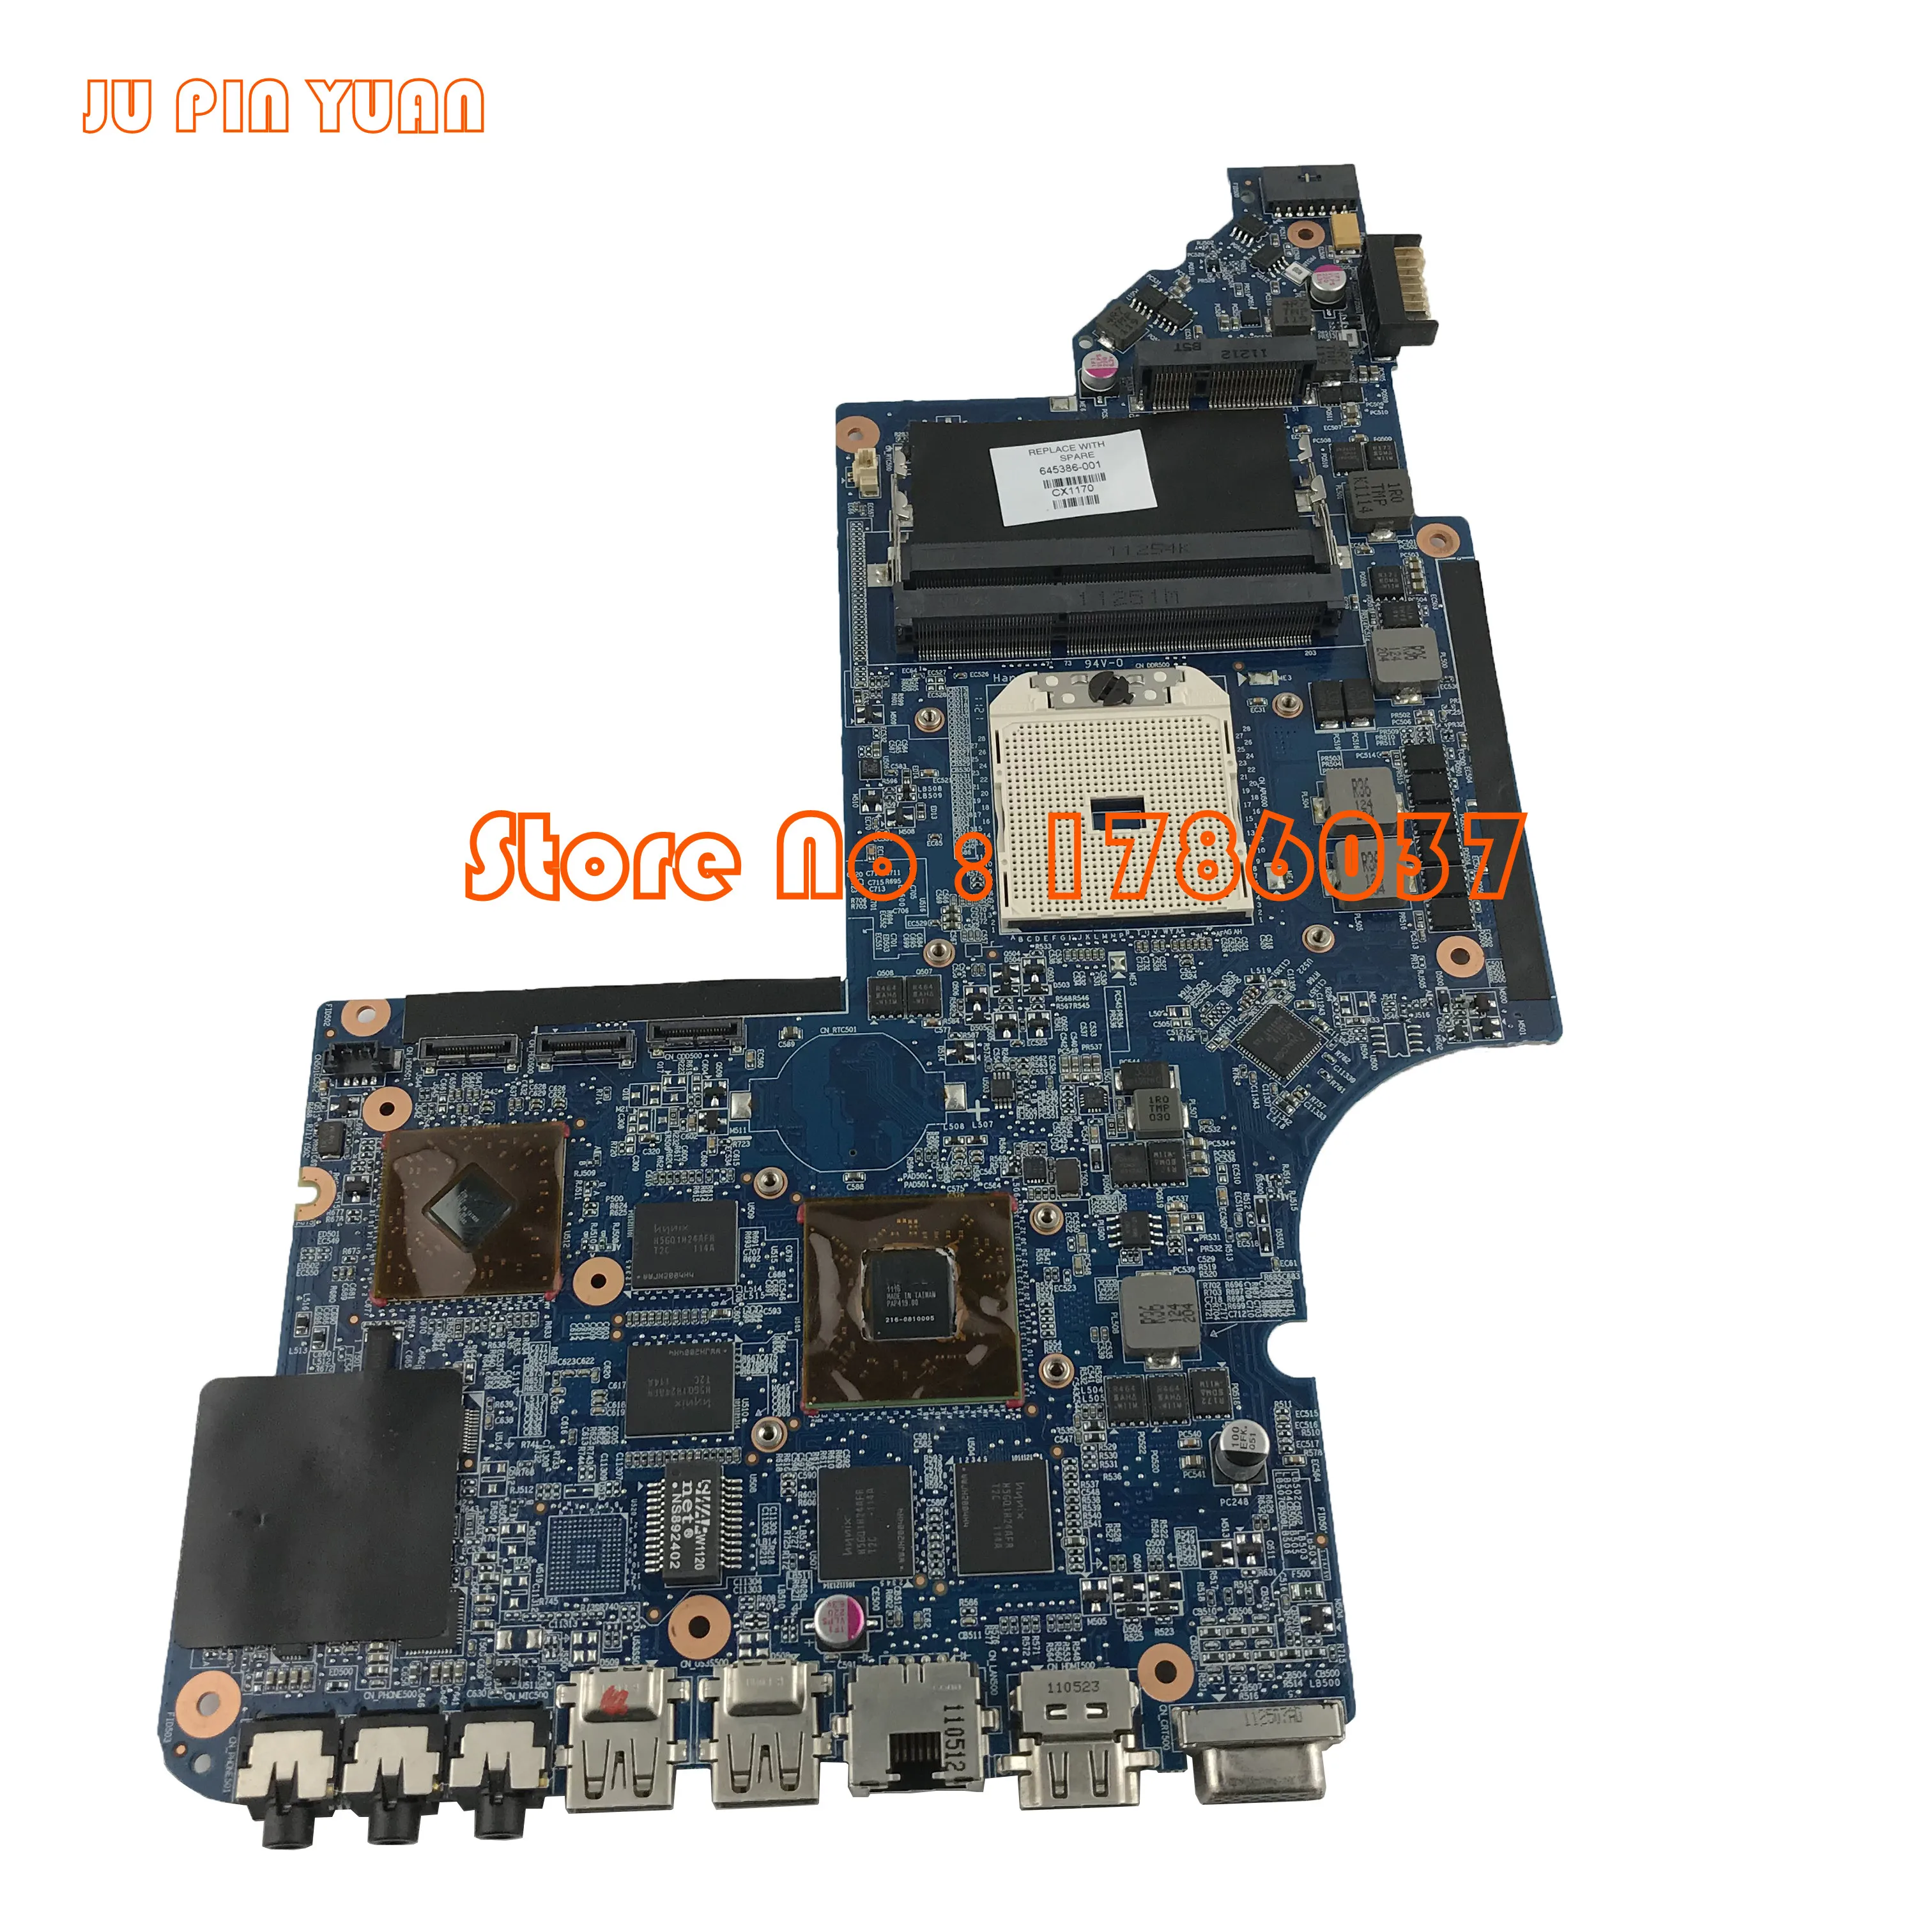 JU PIN YUAN 645386-001 mainboard for HP PAVILION DV7 DV7-6000 laptop motherboard with A70M DSC HD6750/1G All fully Tested